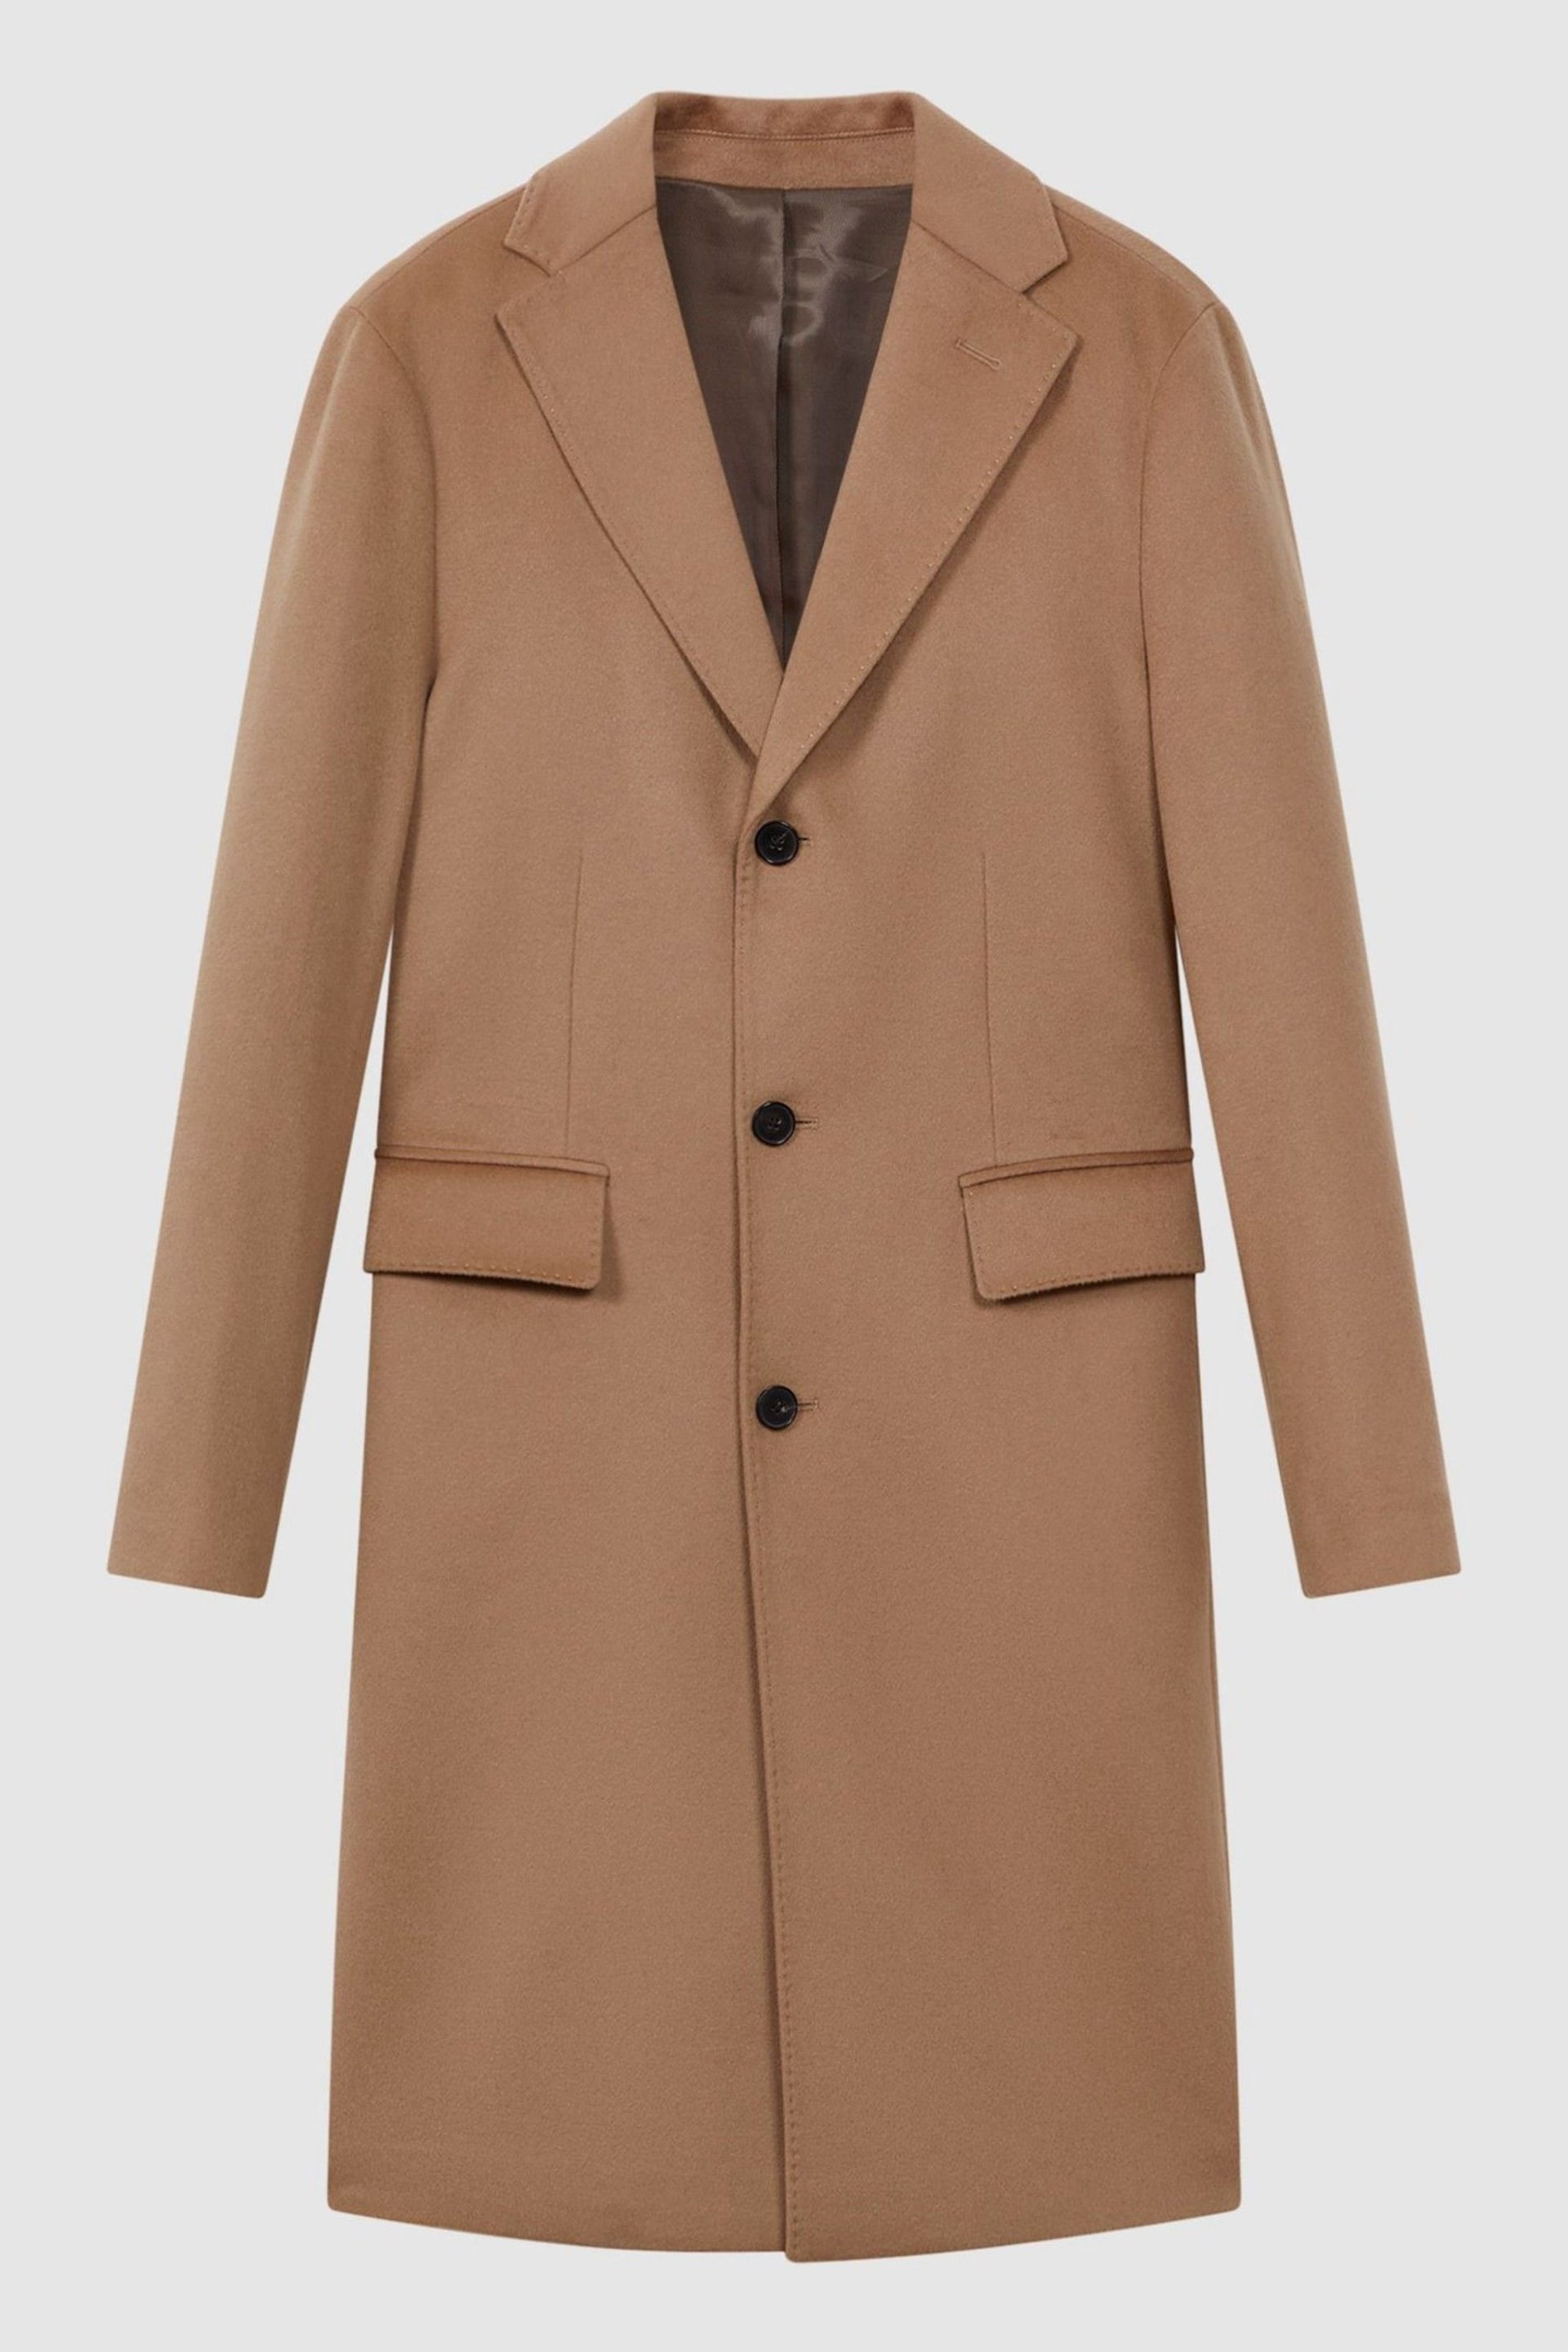 Reiss Camel Tycho Atelier Cashmere Single Breasted Coat - Image 2 of 7